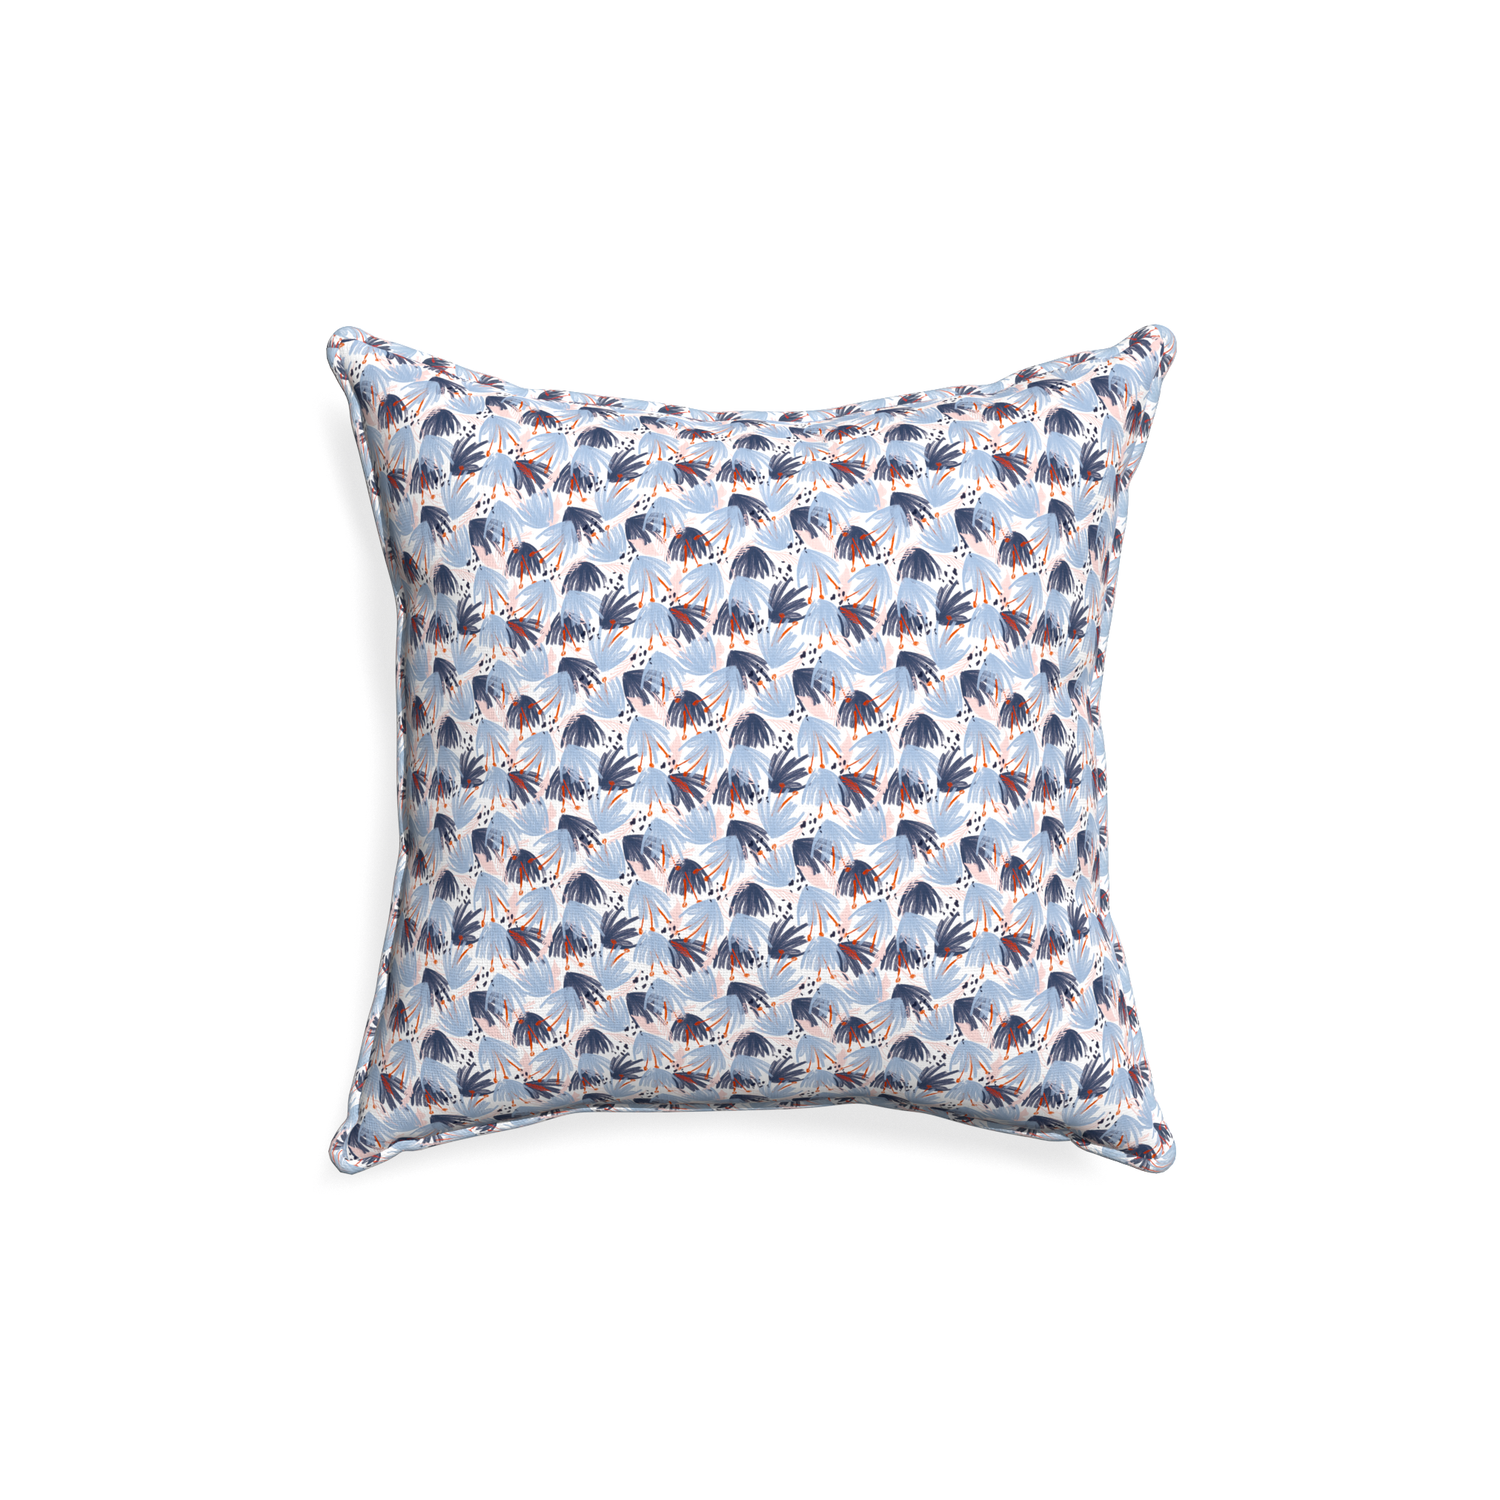 18-square eden blue custom pillow with e piping on white background